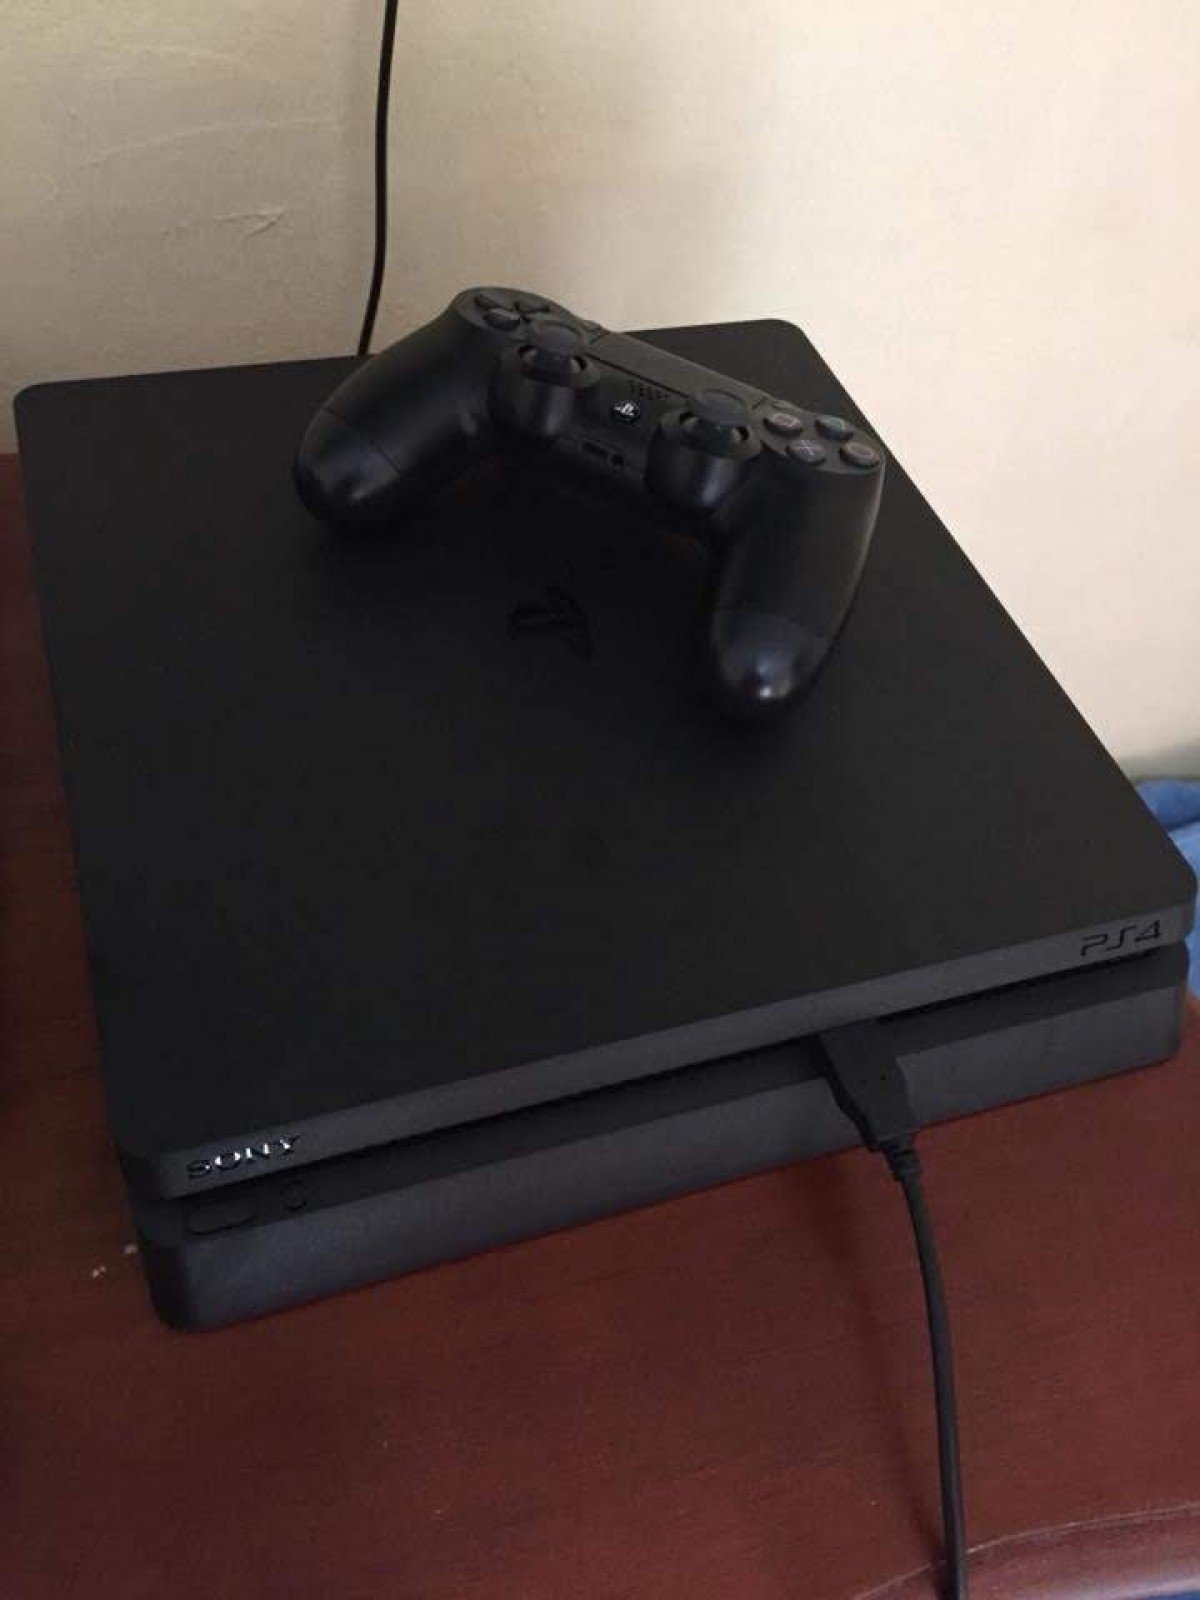 ps4 slim for sale cheap